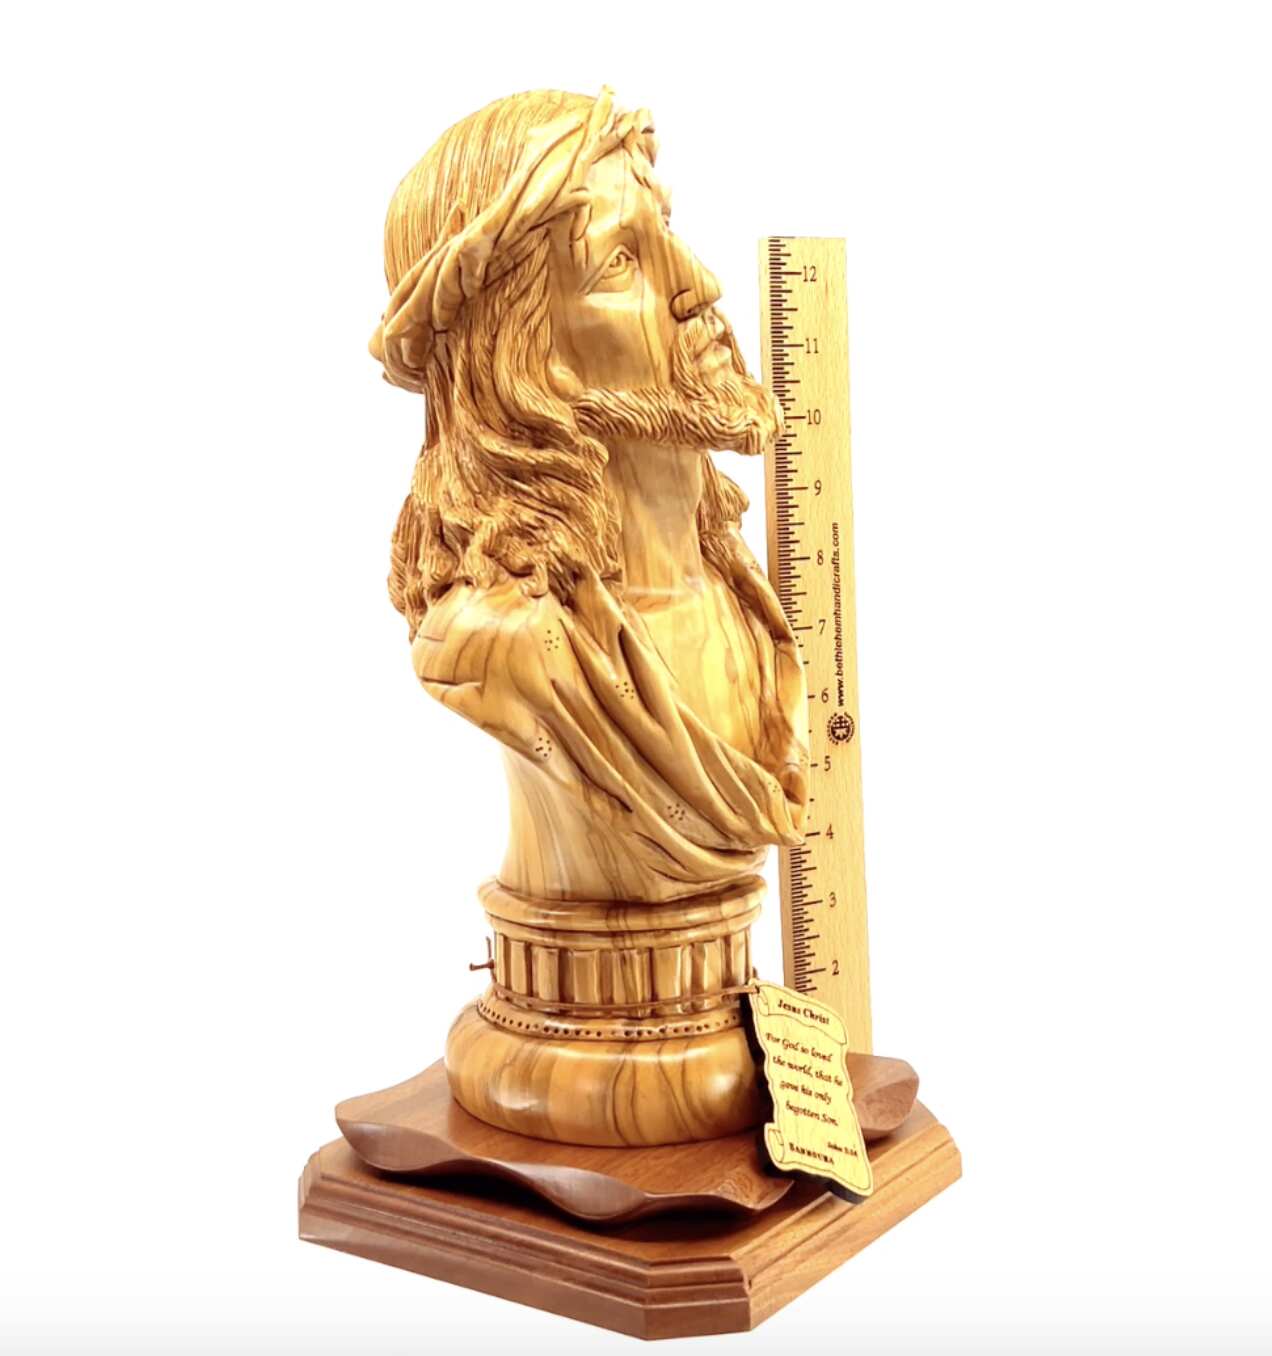 'Bust of Jesus' Head' 14.5", Carved Statute from Holy Land Olive Wood